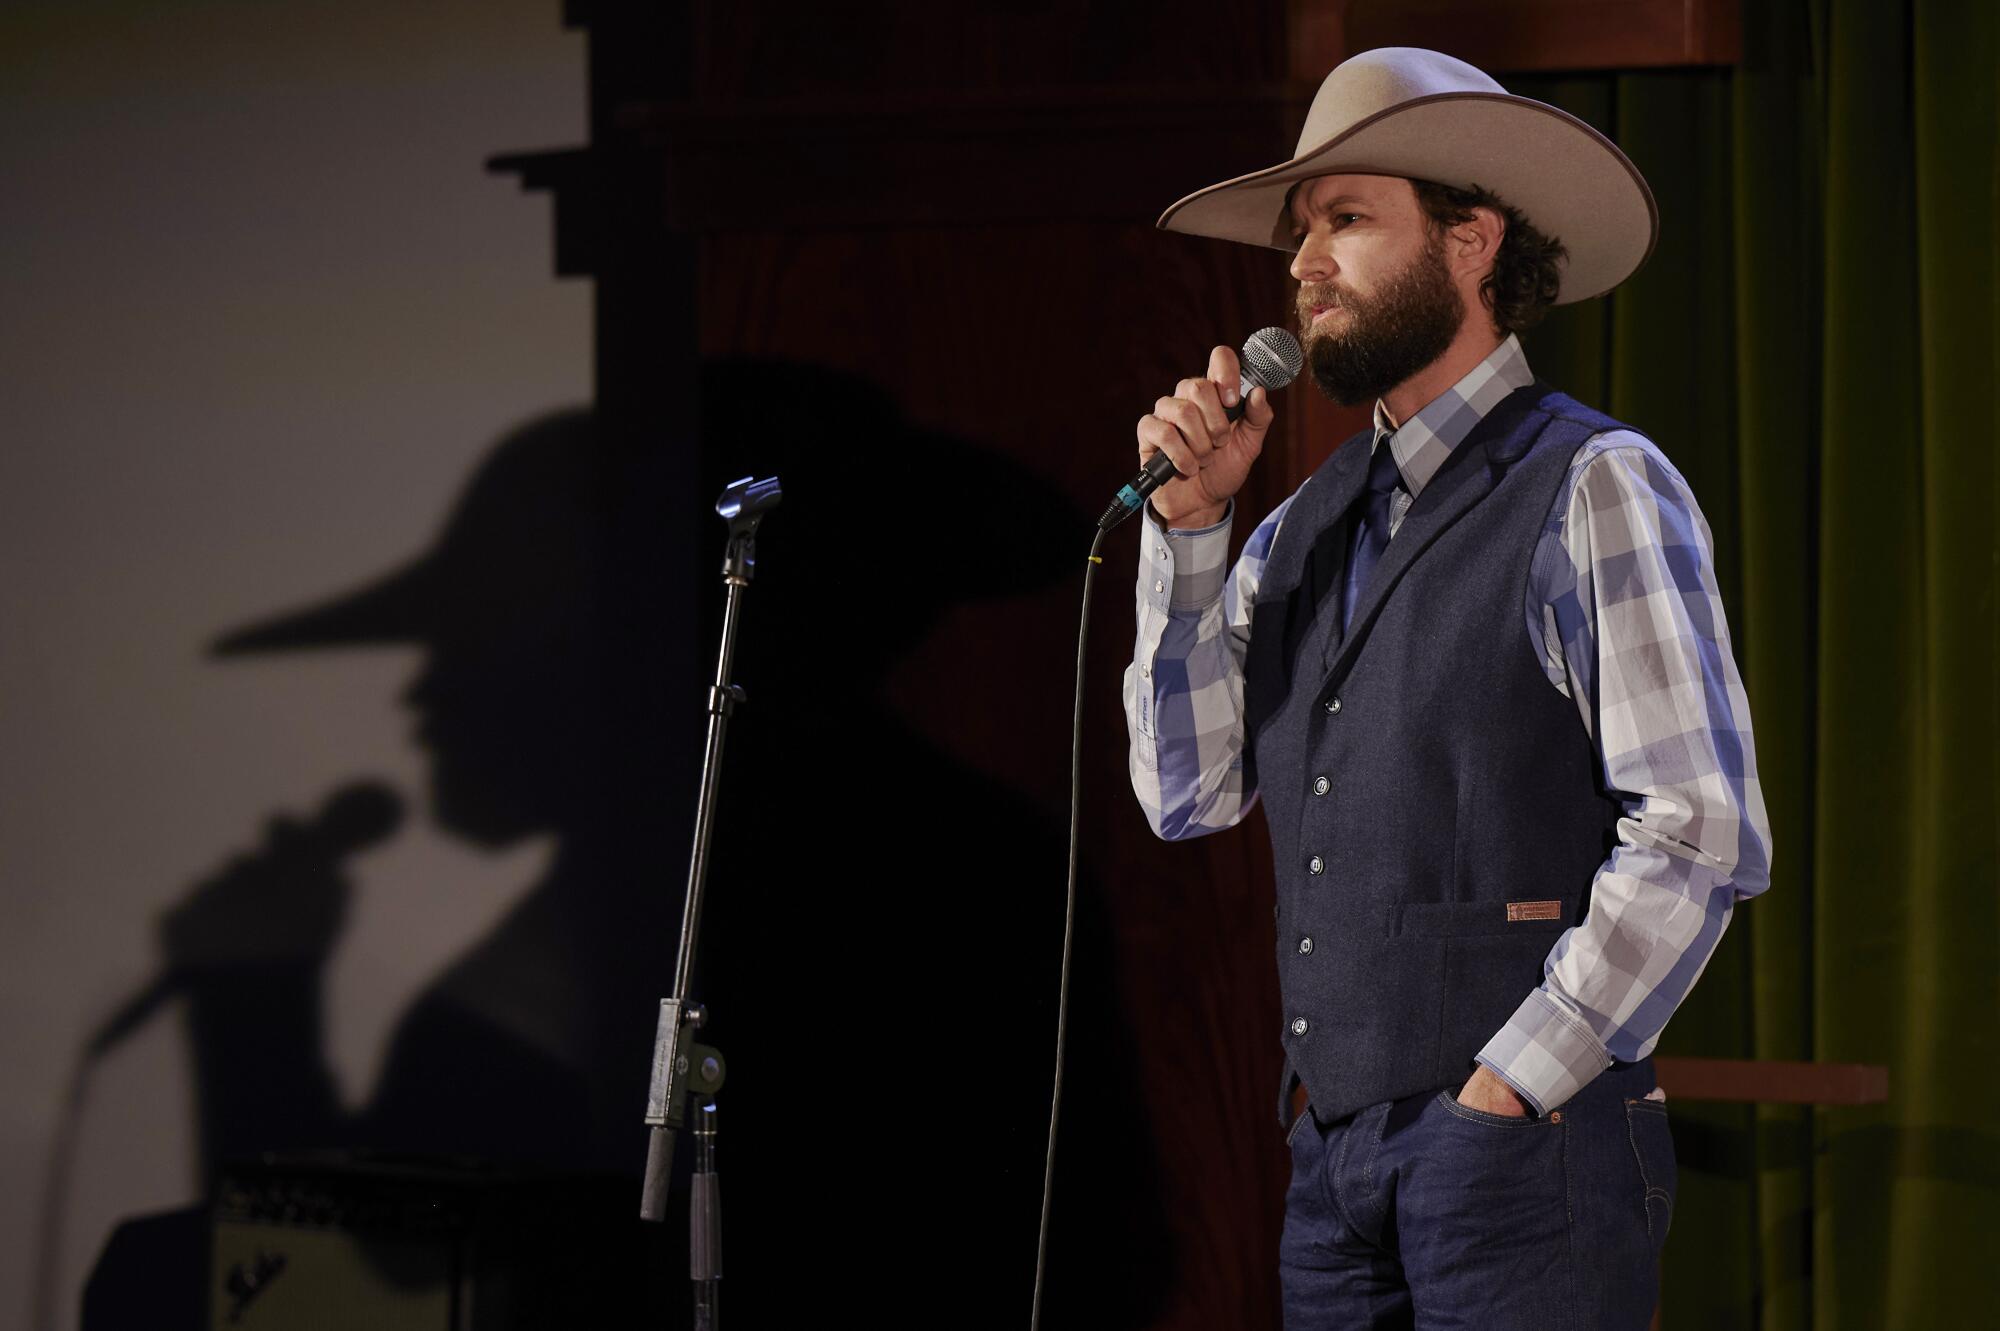 Poet Jake Riley performs at the Western Folklife Center during the National Cowboy Poetry Gathering.